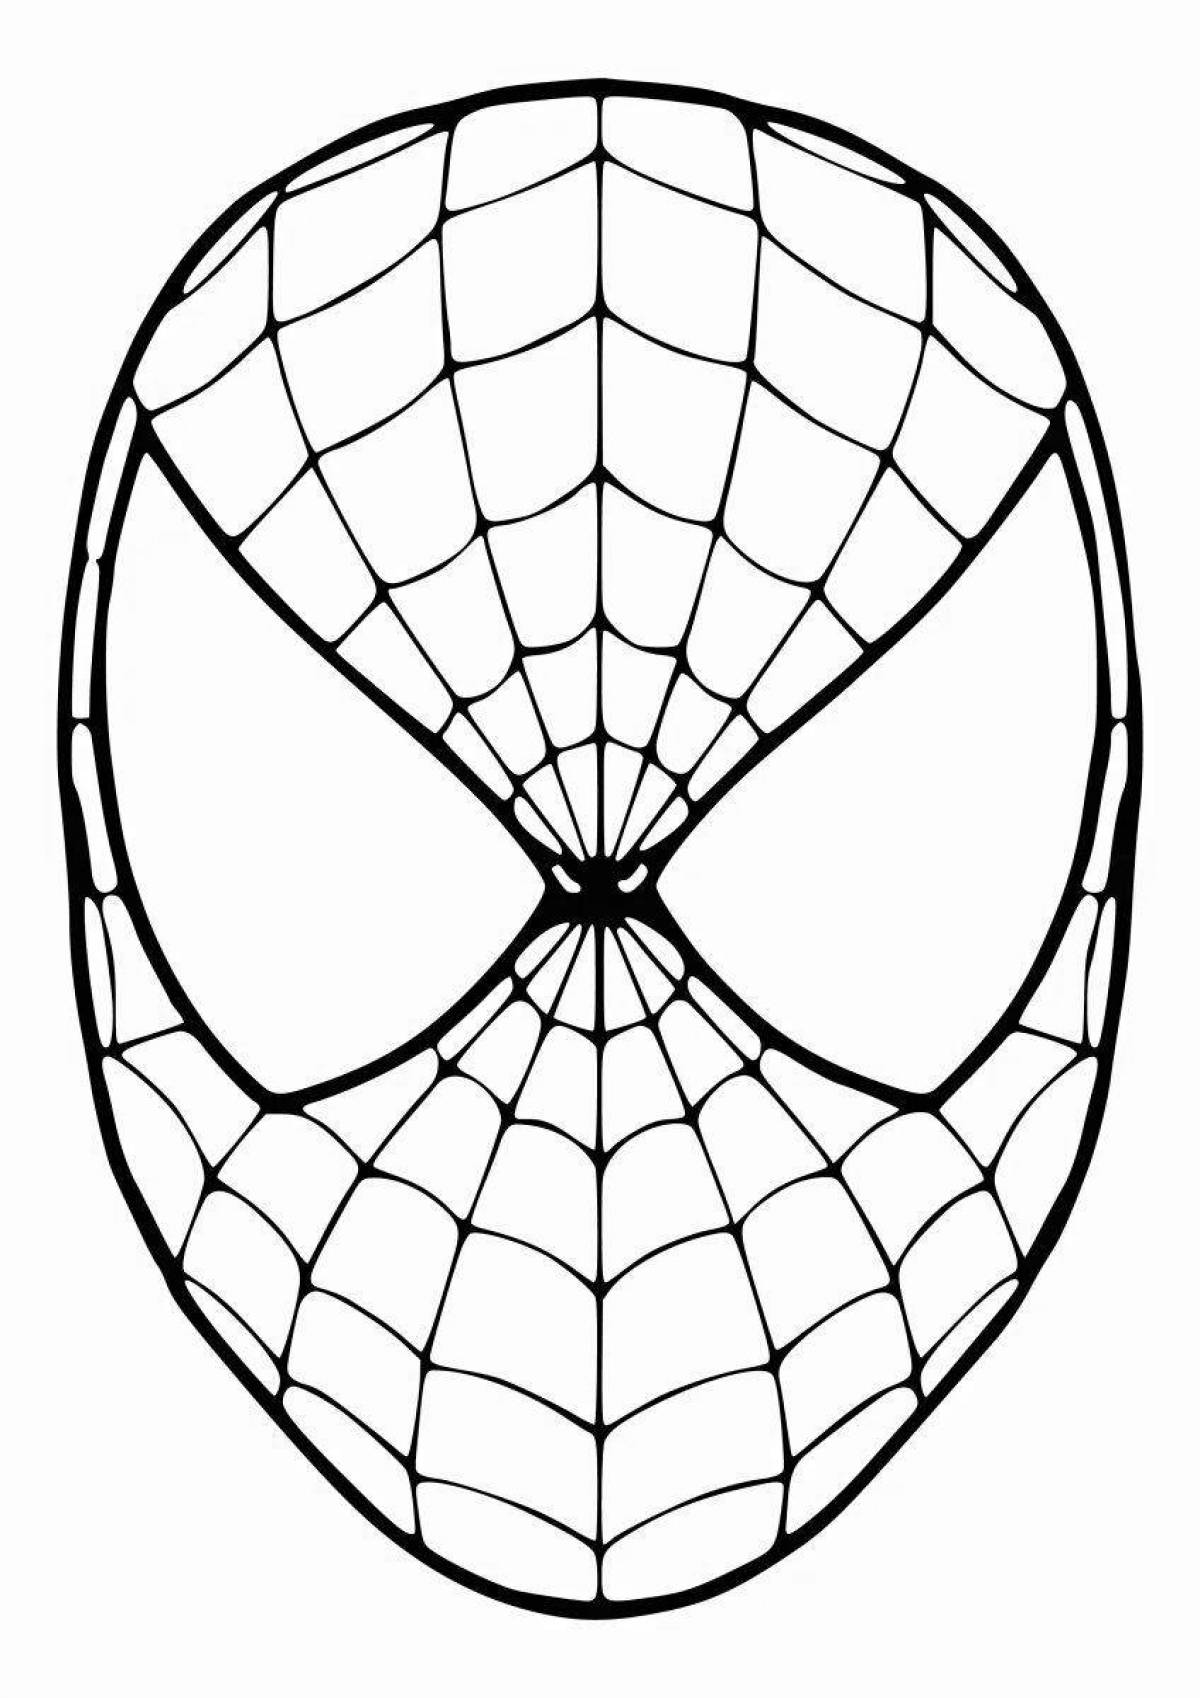 Spiderman mask coloring page